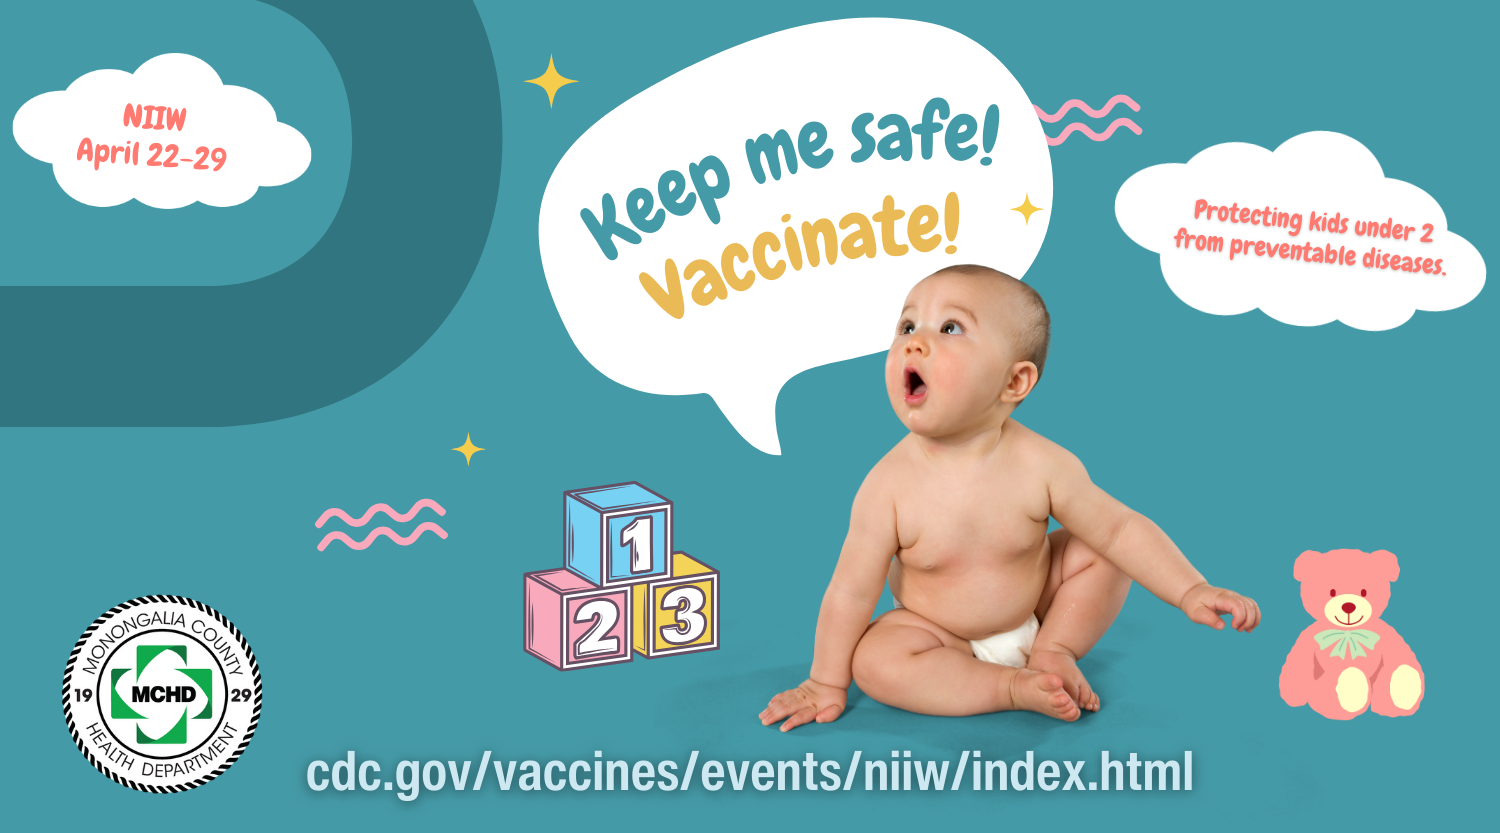 Now is truly the time to talk about infant immunization